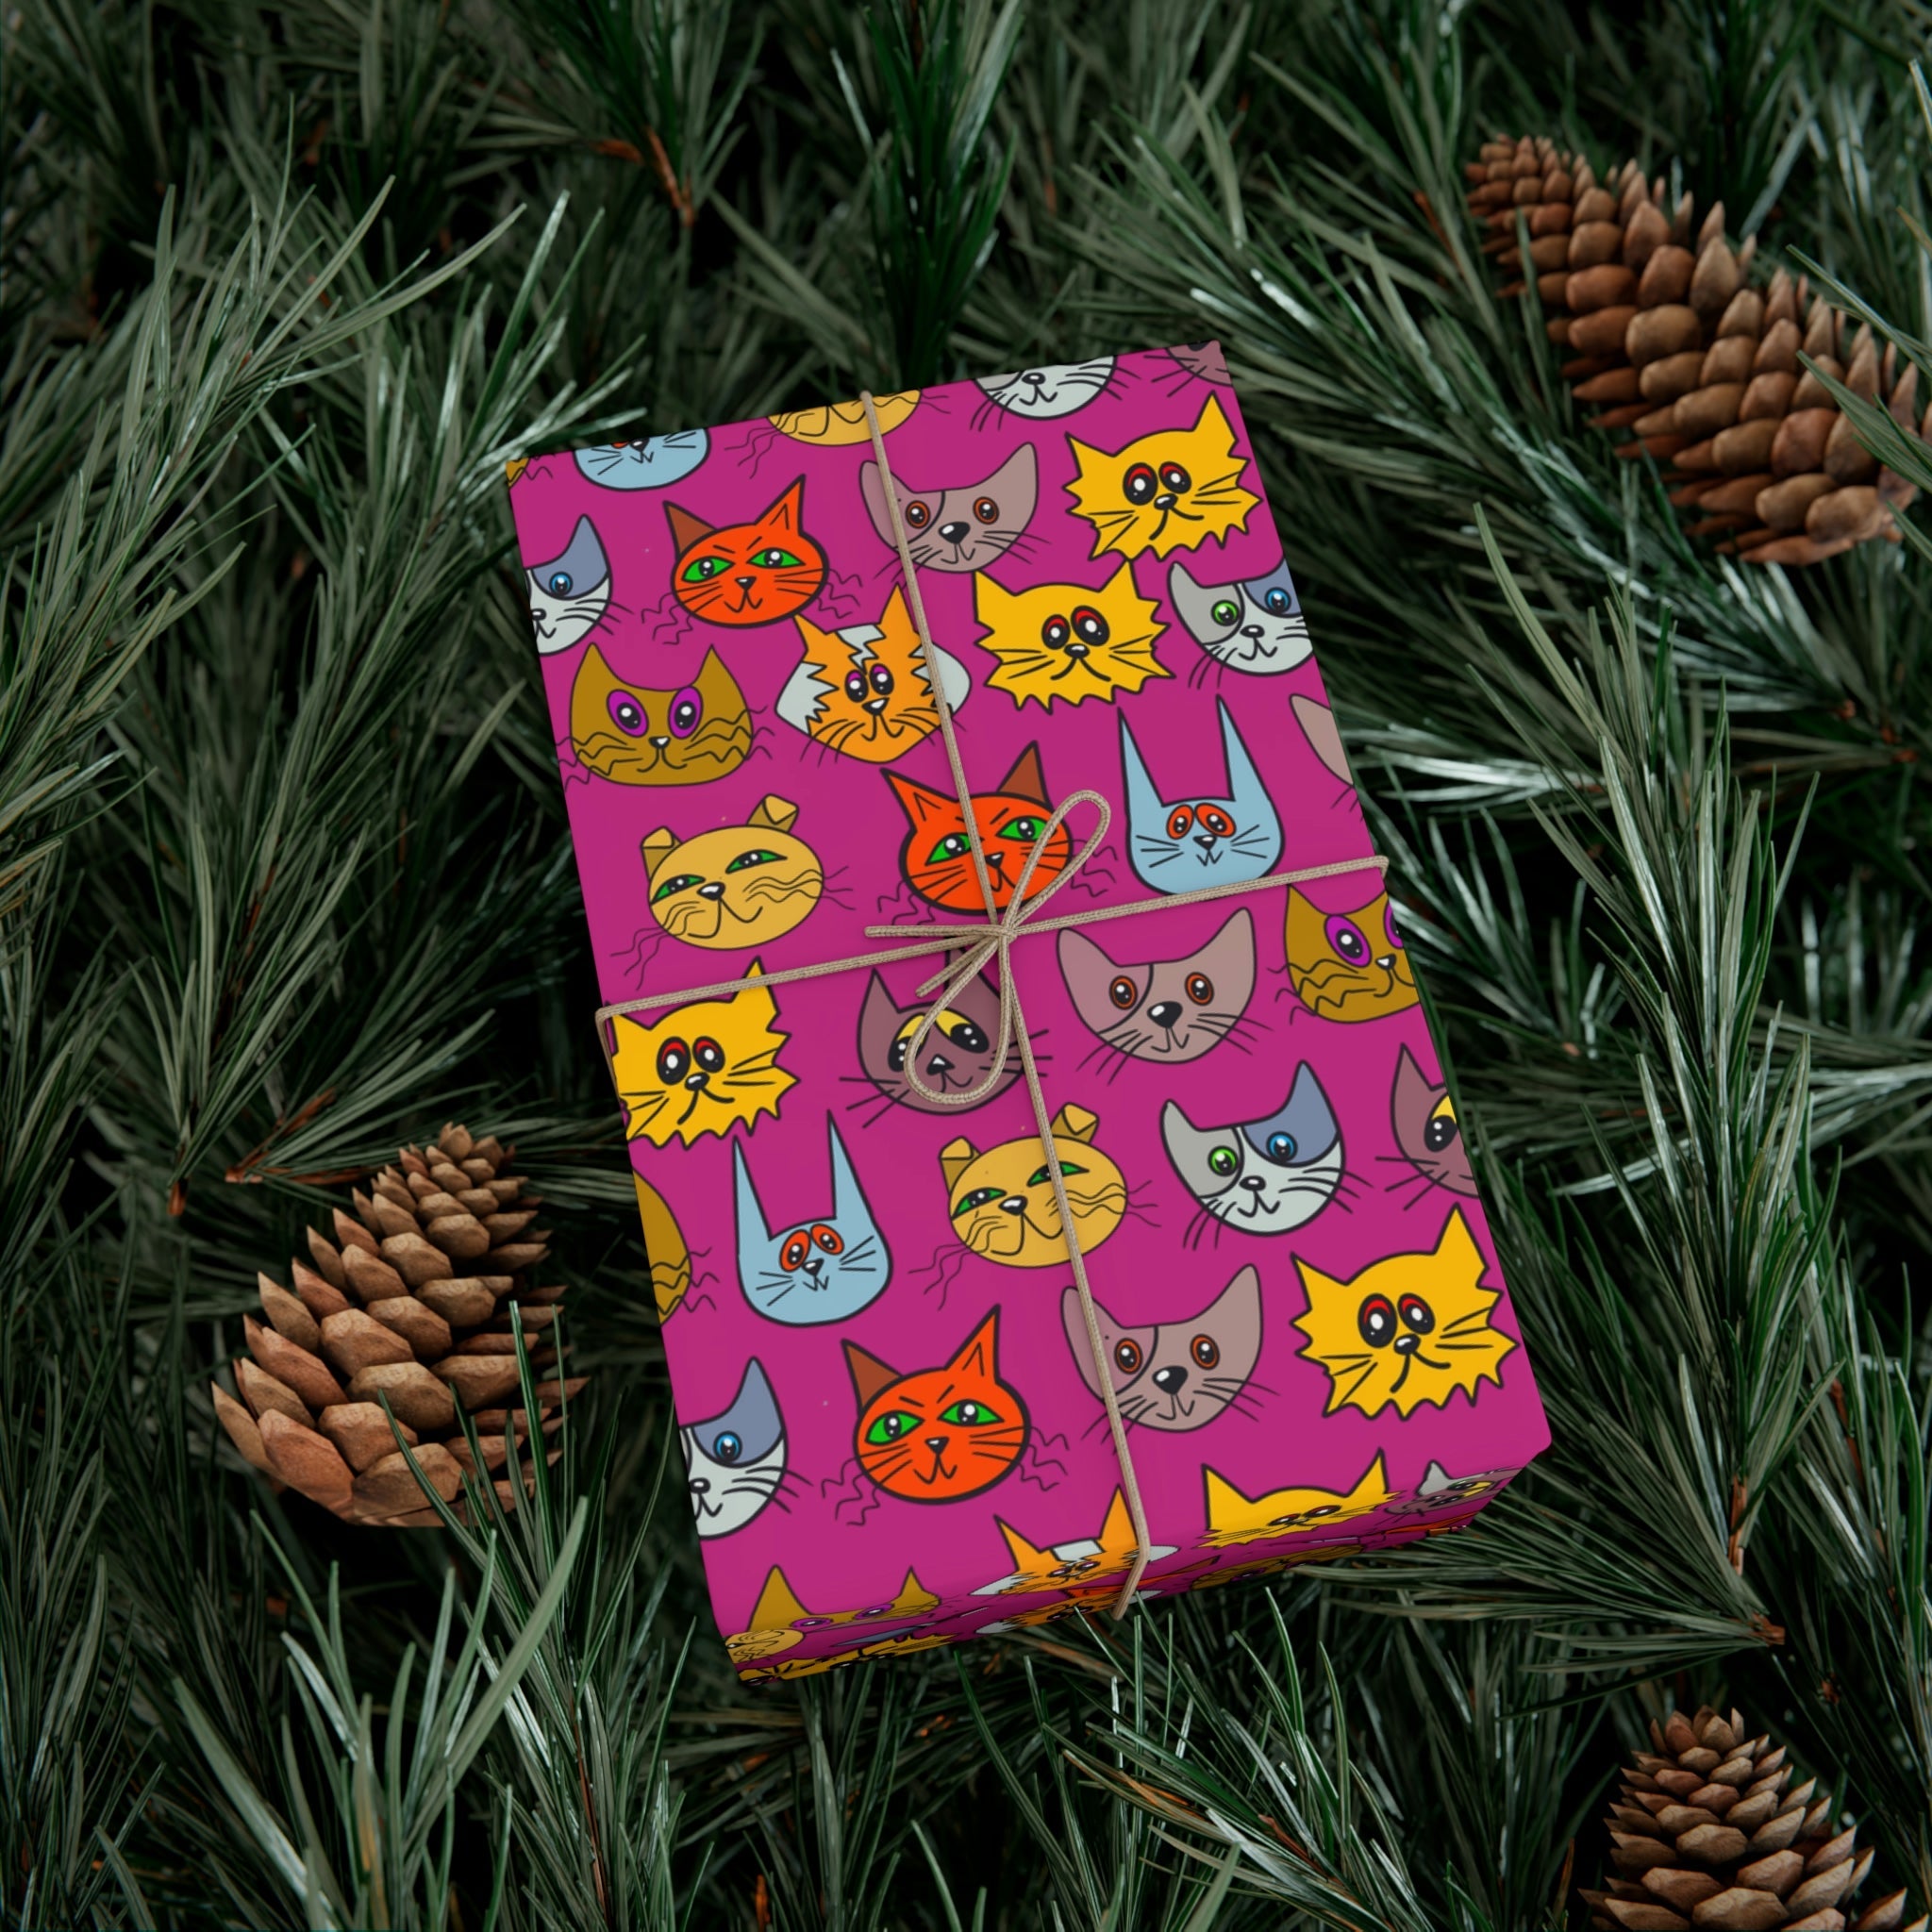 Gift Wrapping Paper, Kooky Kats Hot Pink